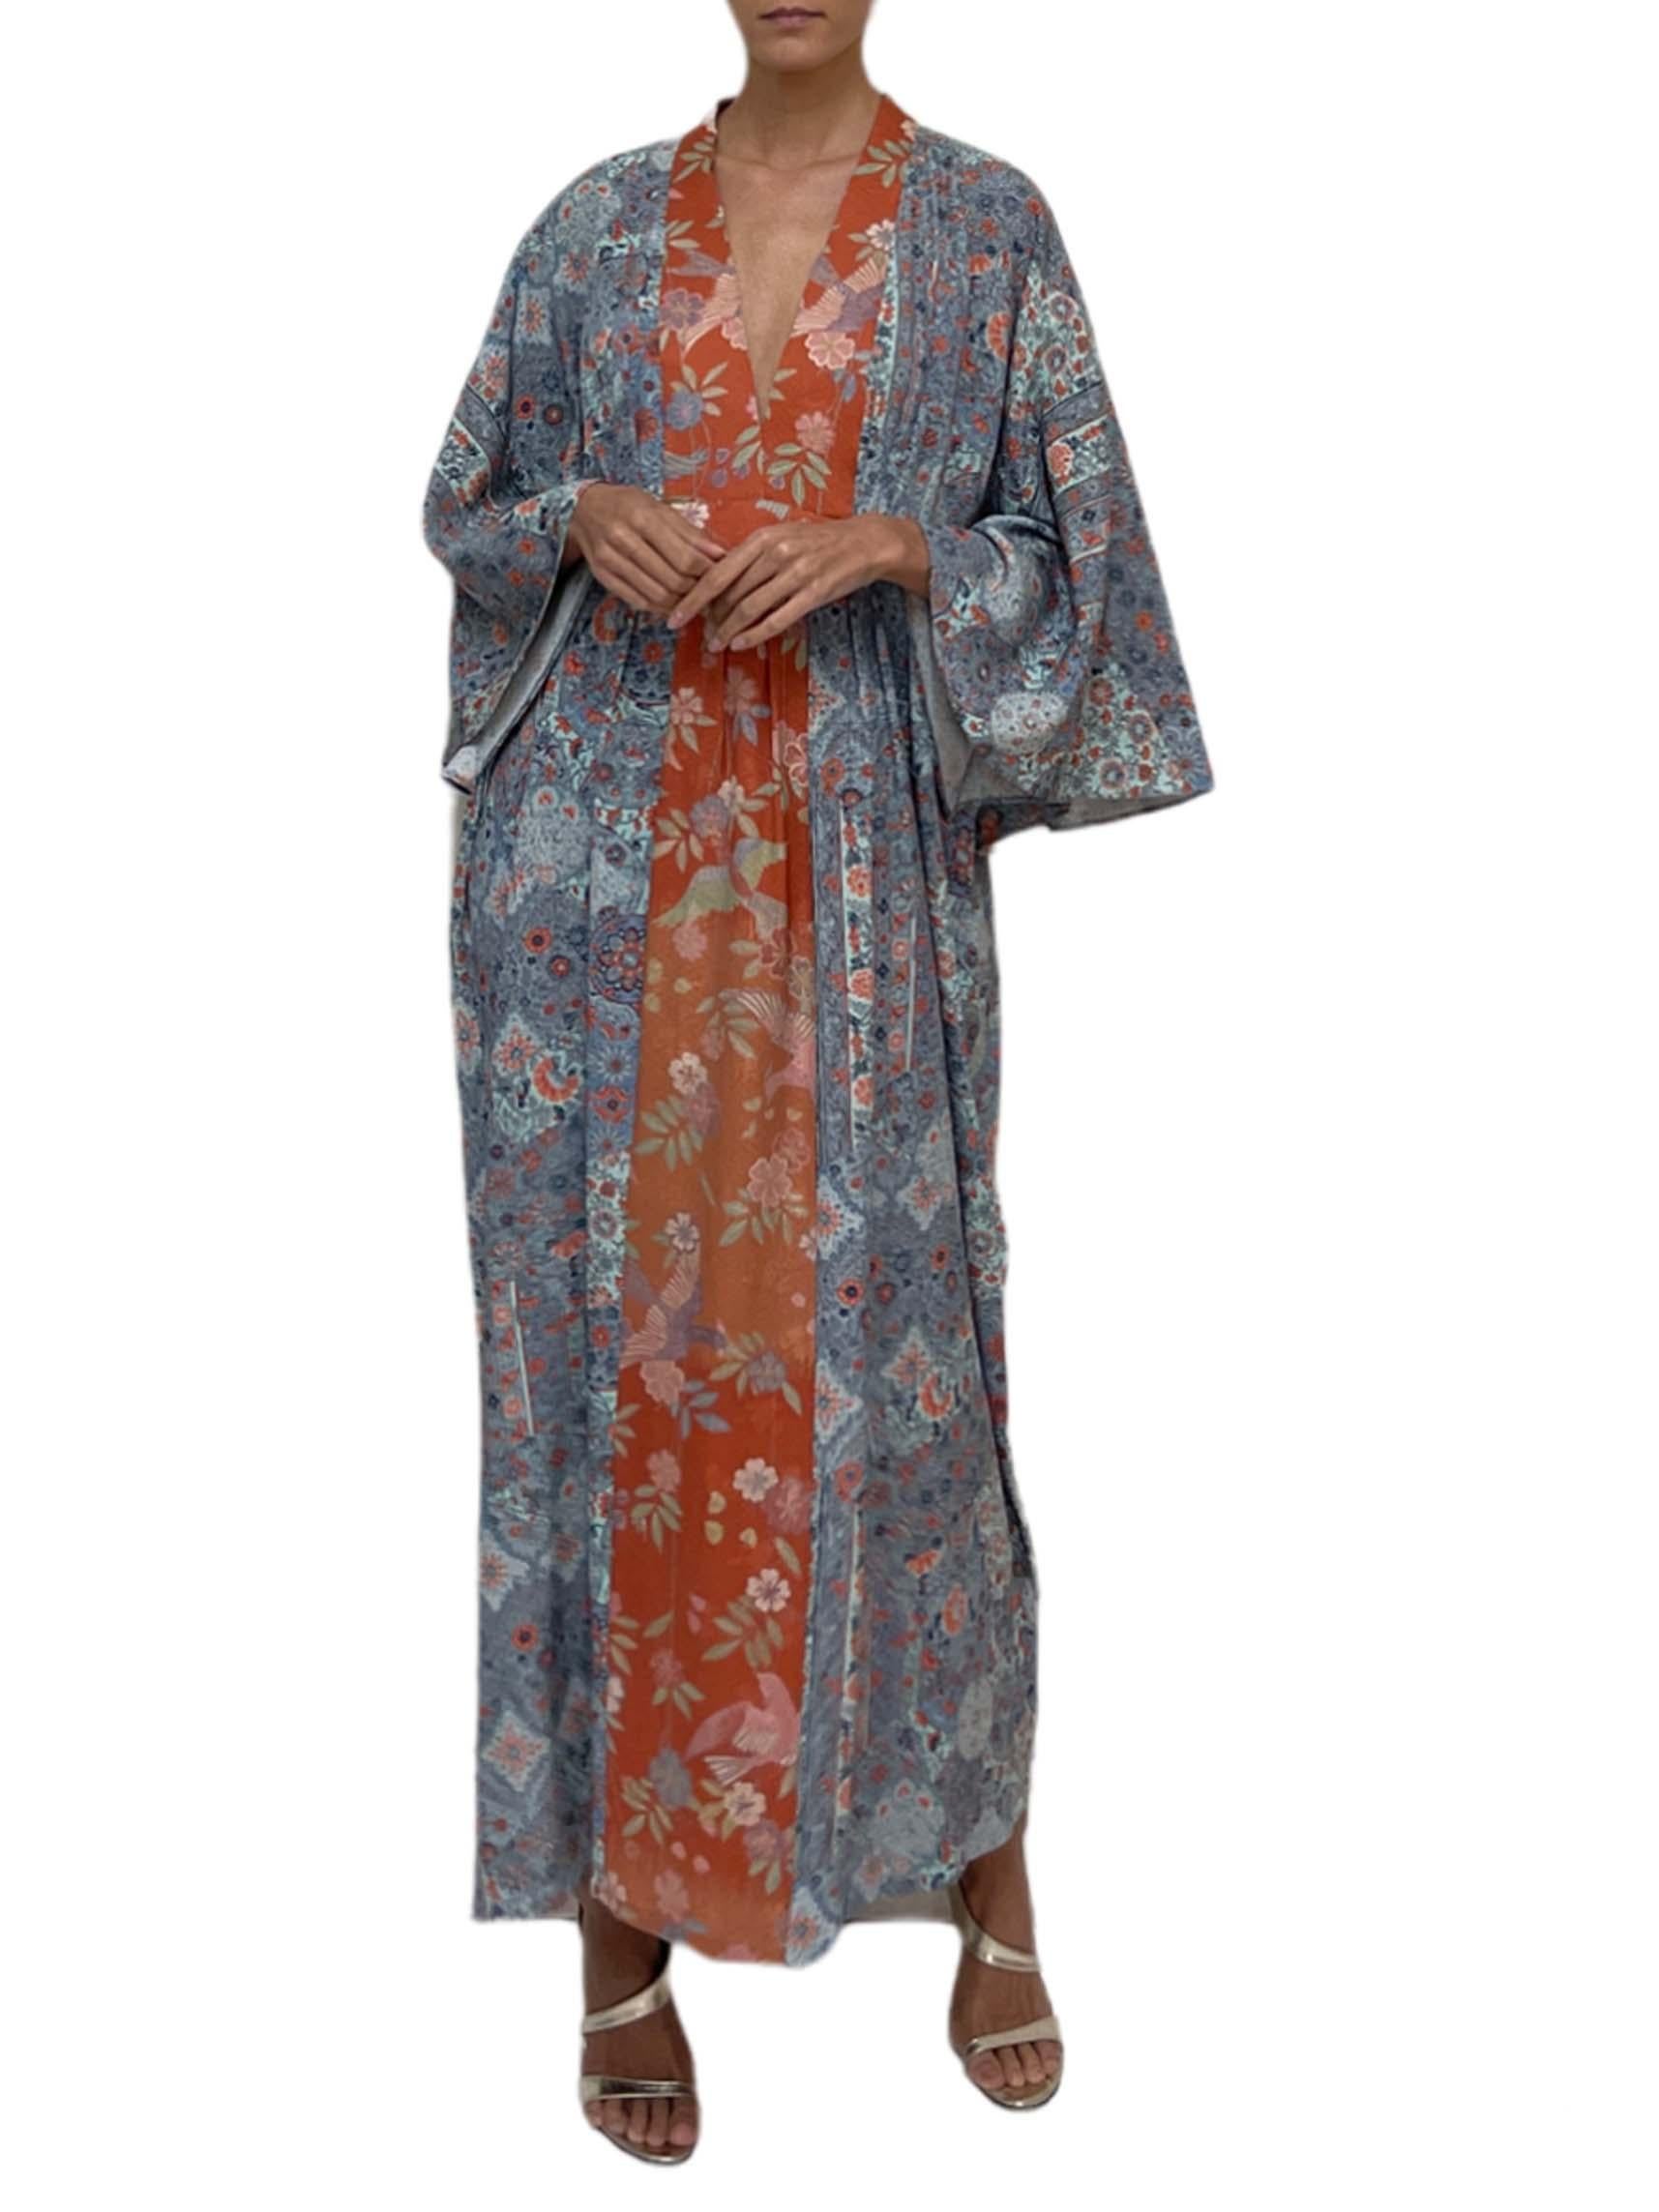 MORPHEW COLLECTION Blue & Orange Japanese Kimono Silk Kaftan In Excellent Condition For Sale In New York, NY